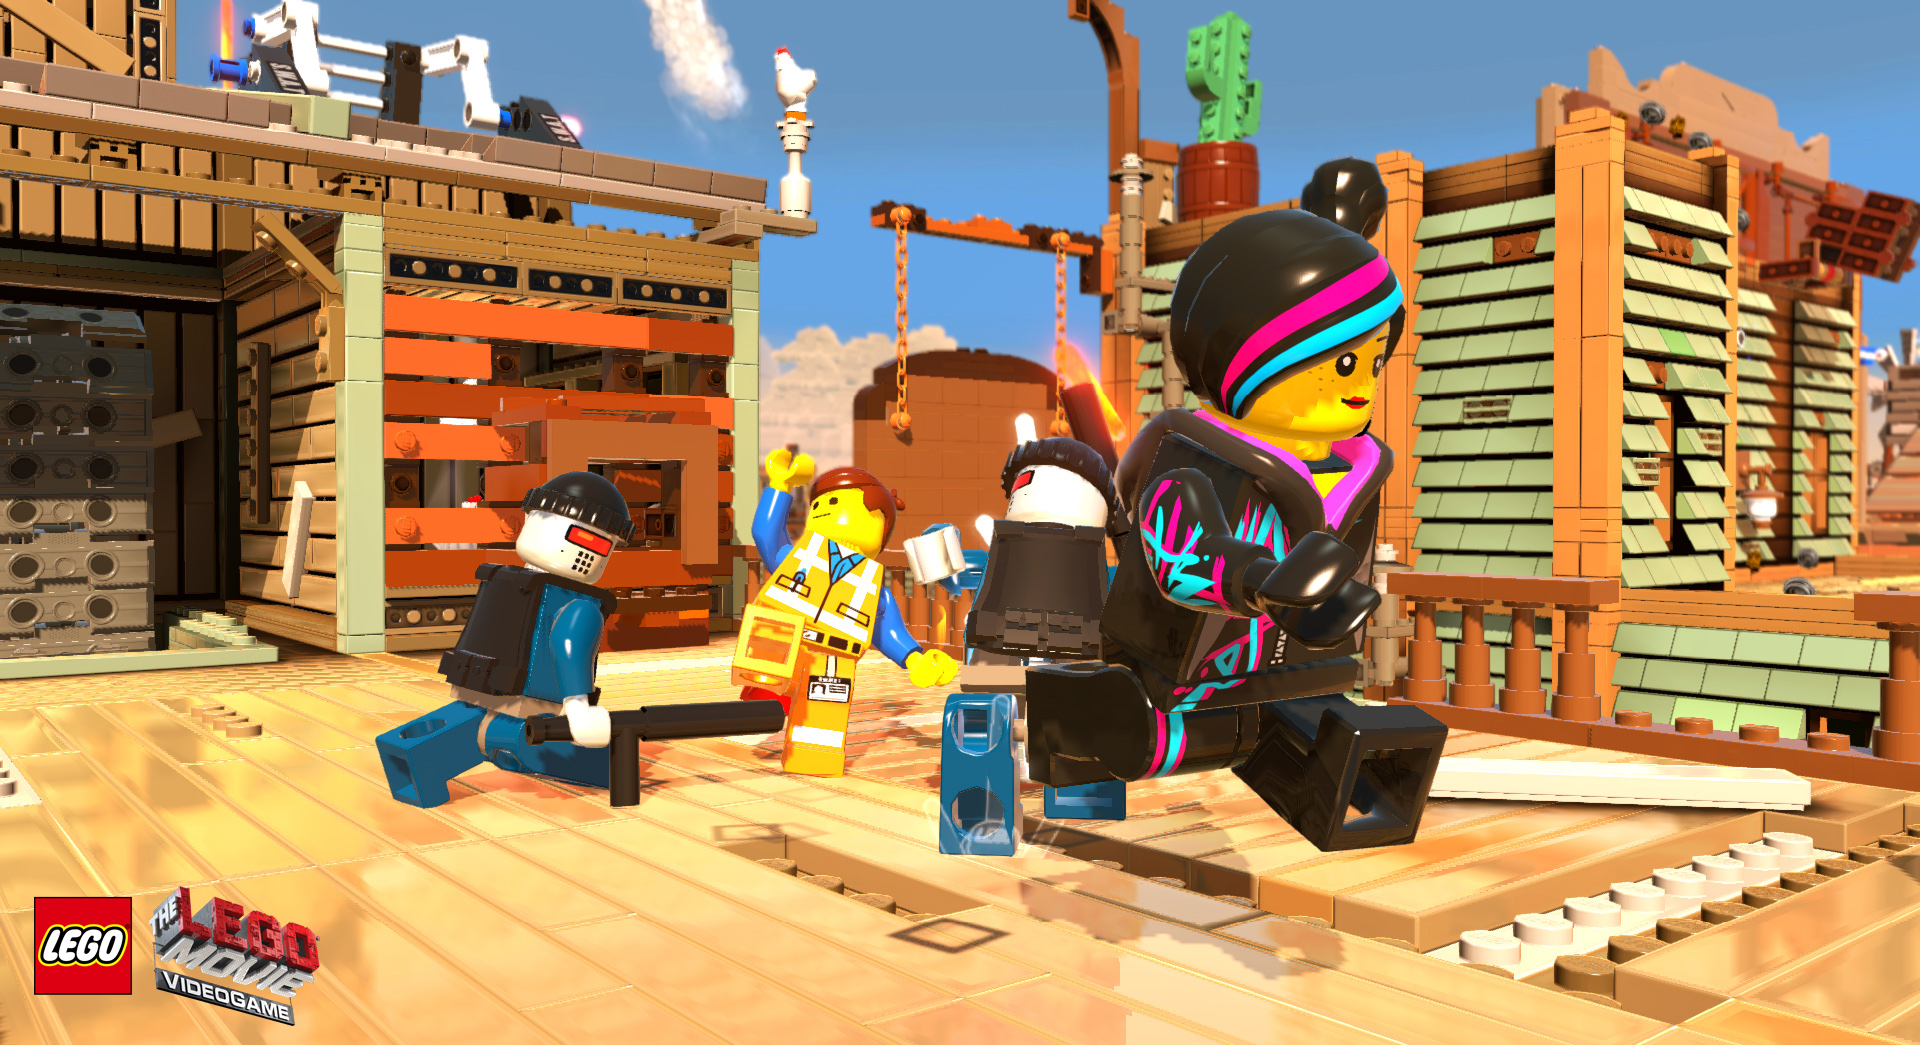 The LEGO Movie Videogame #21